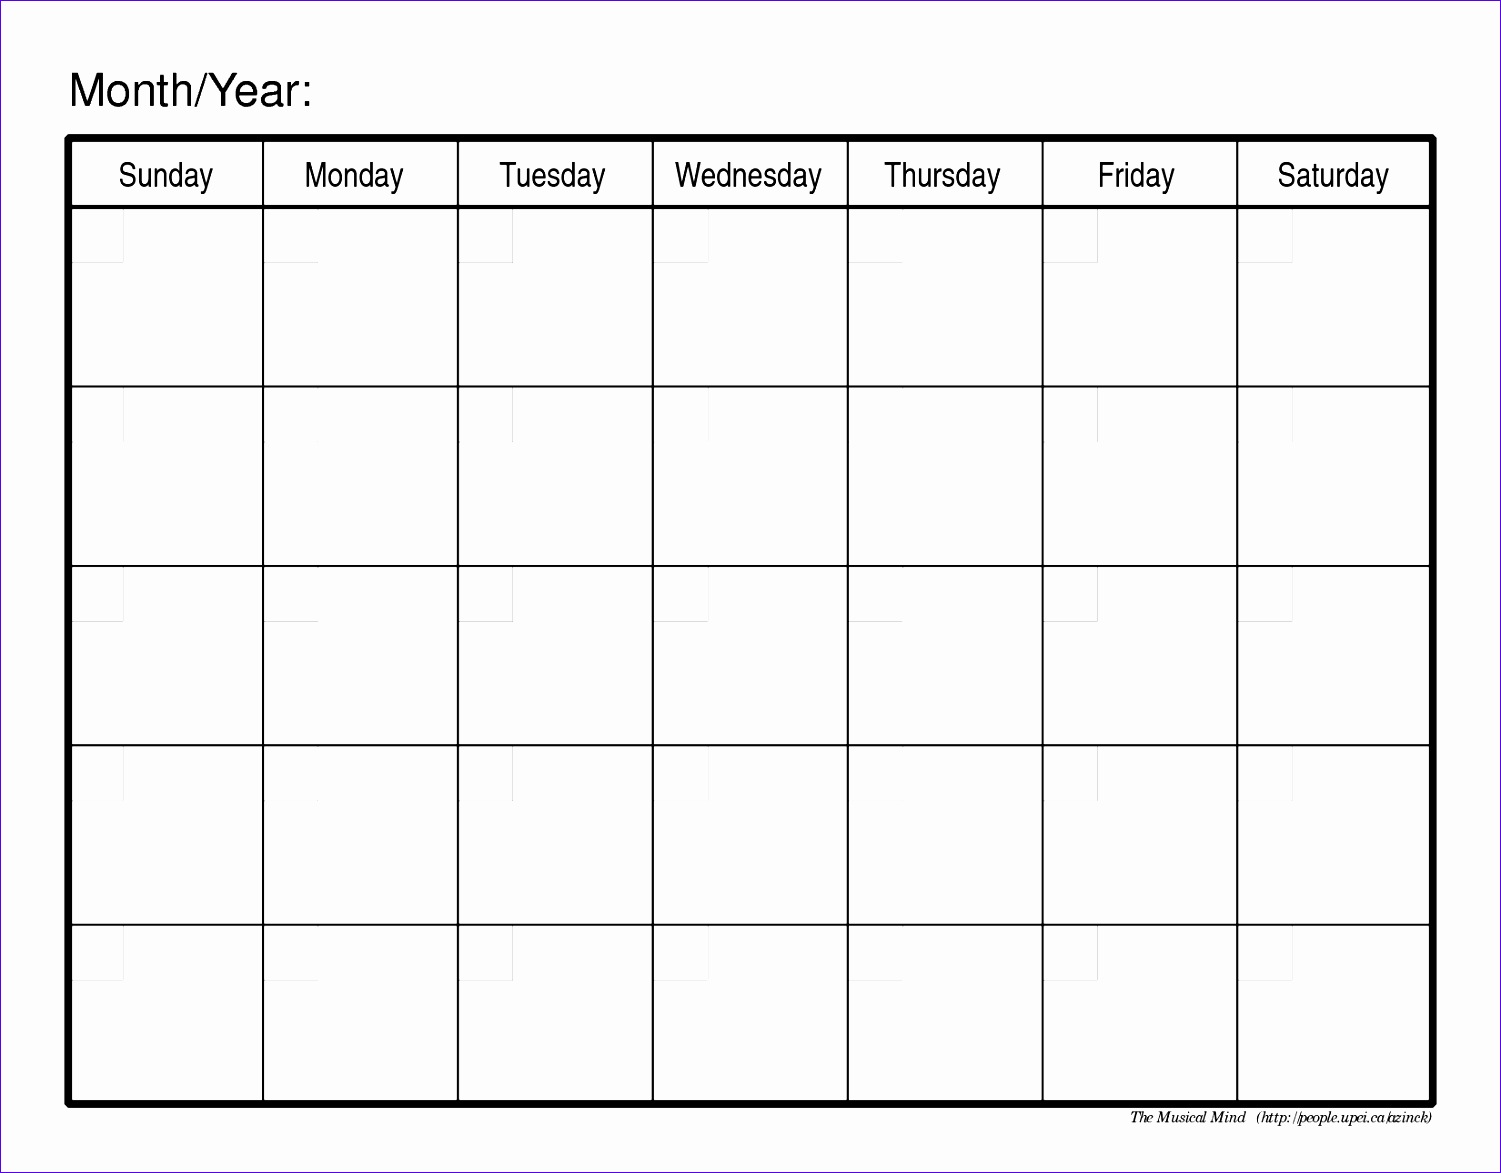 monthly schedule template 15011173